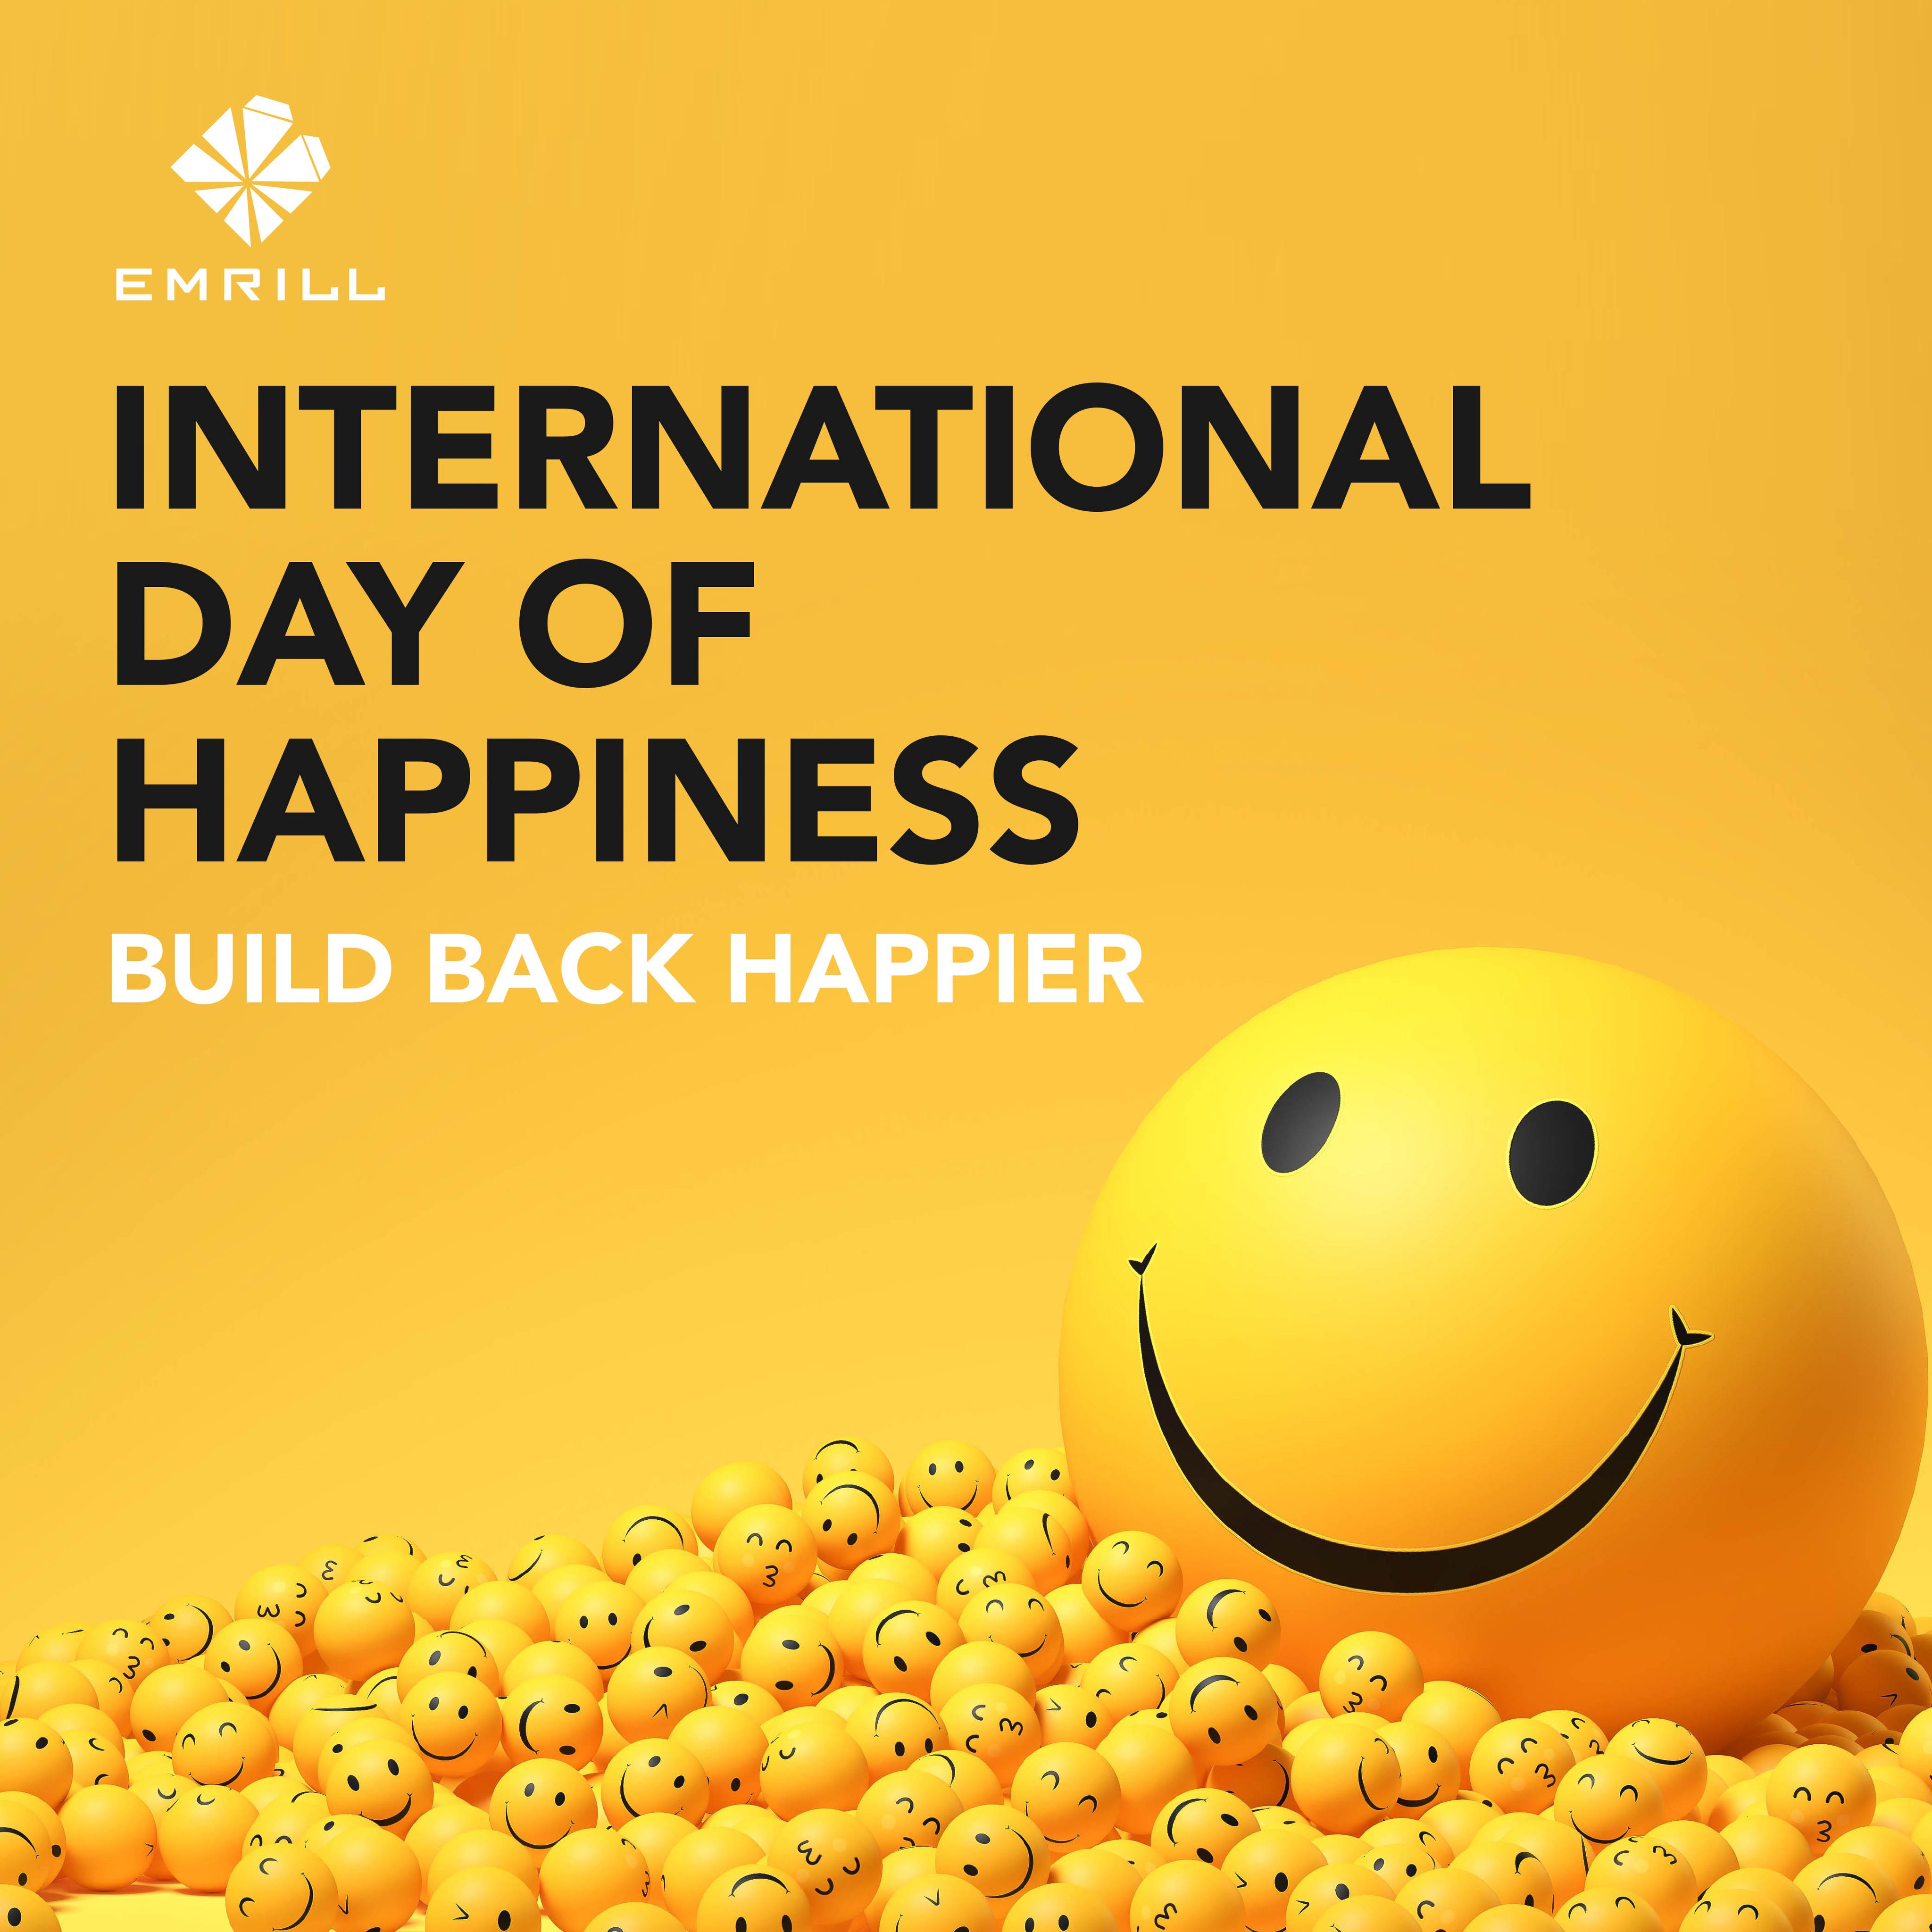 Emrill Services Happy International Happiness Day To Everyone Take Time Today To Do Something That Can Make Someone Happy Let S Build A Better World And Choosetohelp By Sharing Positive Messages